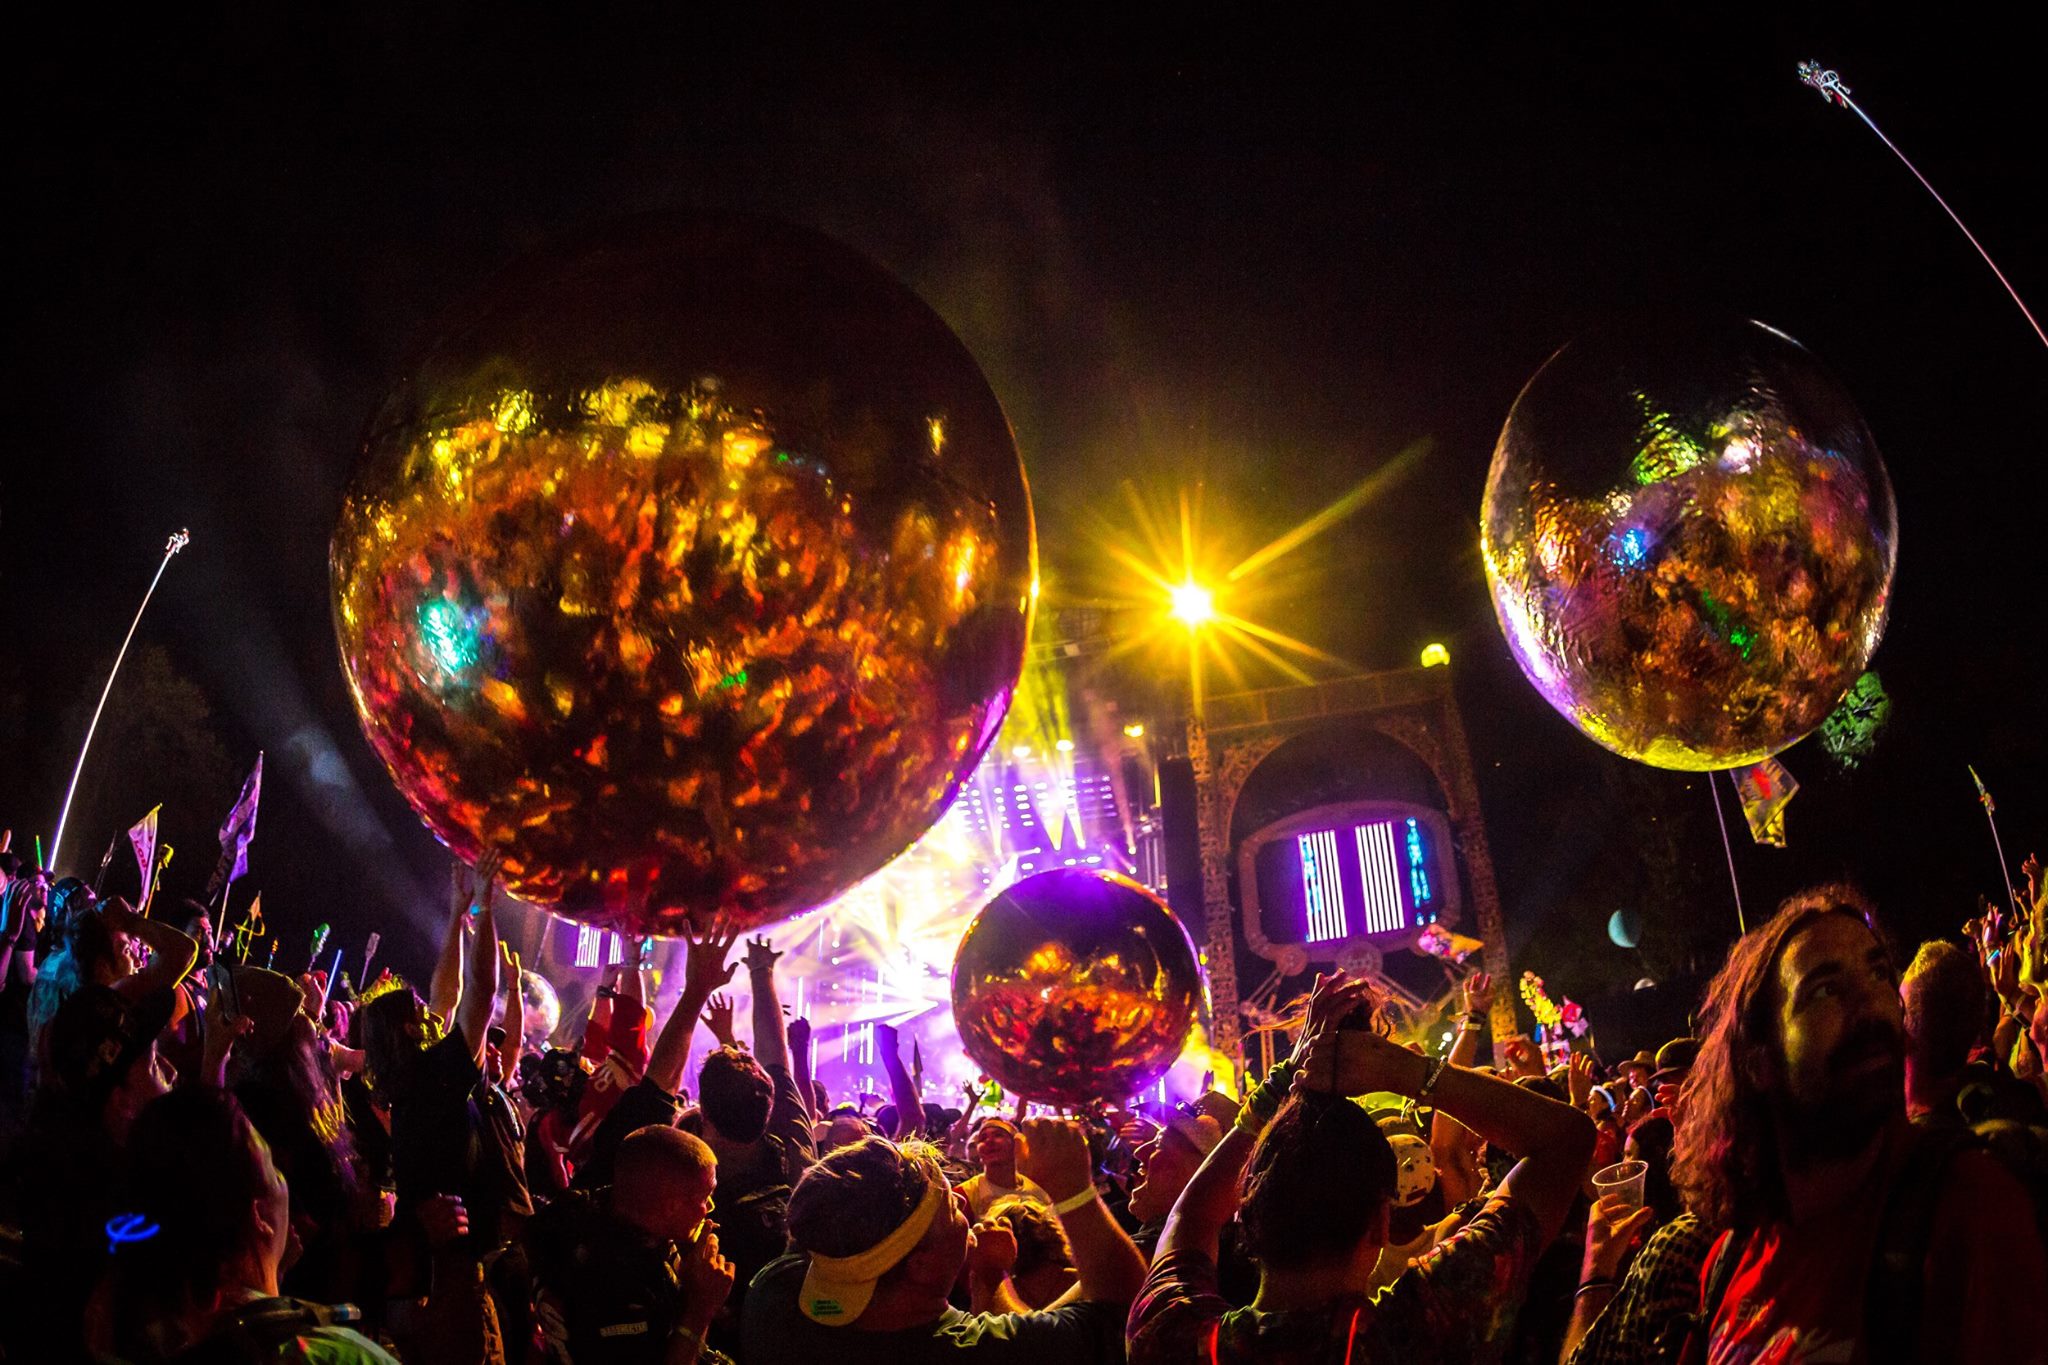 Image courtesy of Electric Forest Festival.